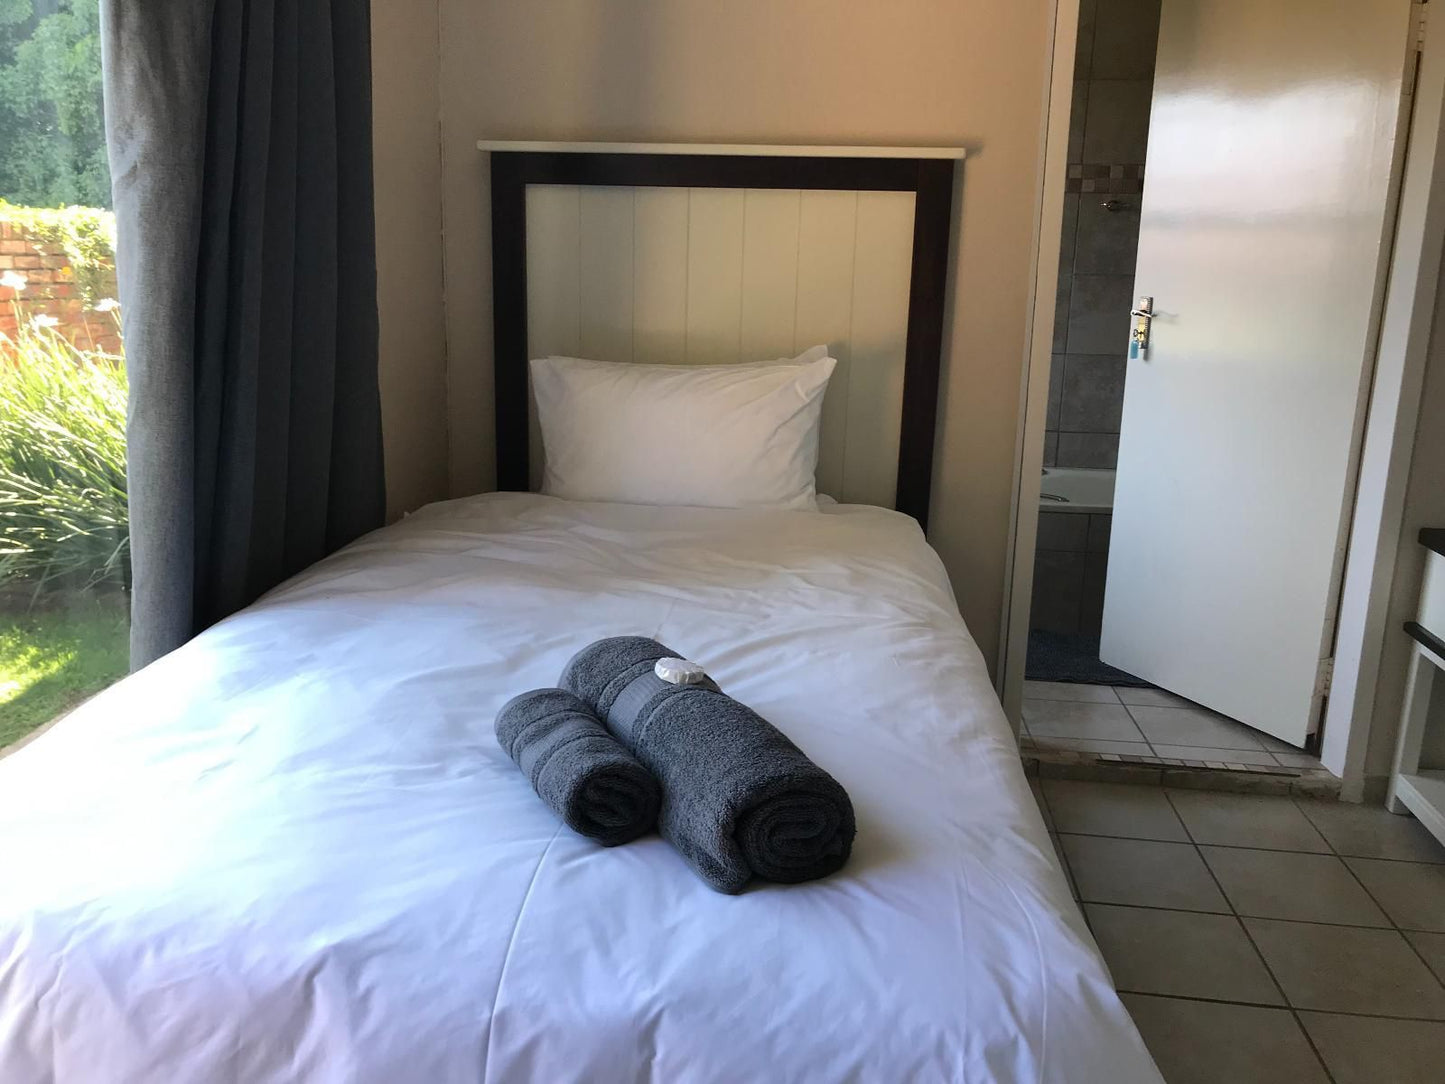 Potch Best Rest Potchefstroom North West Province South Africa Bedroom